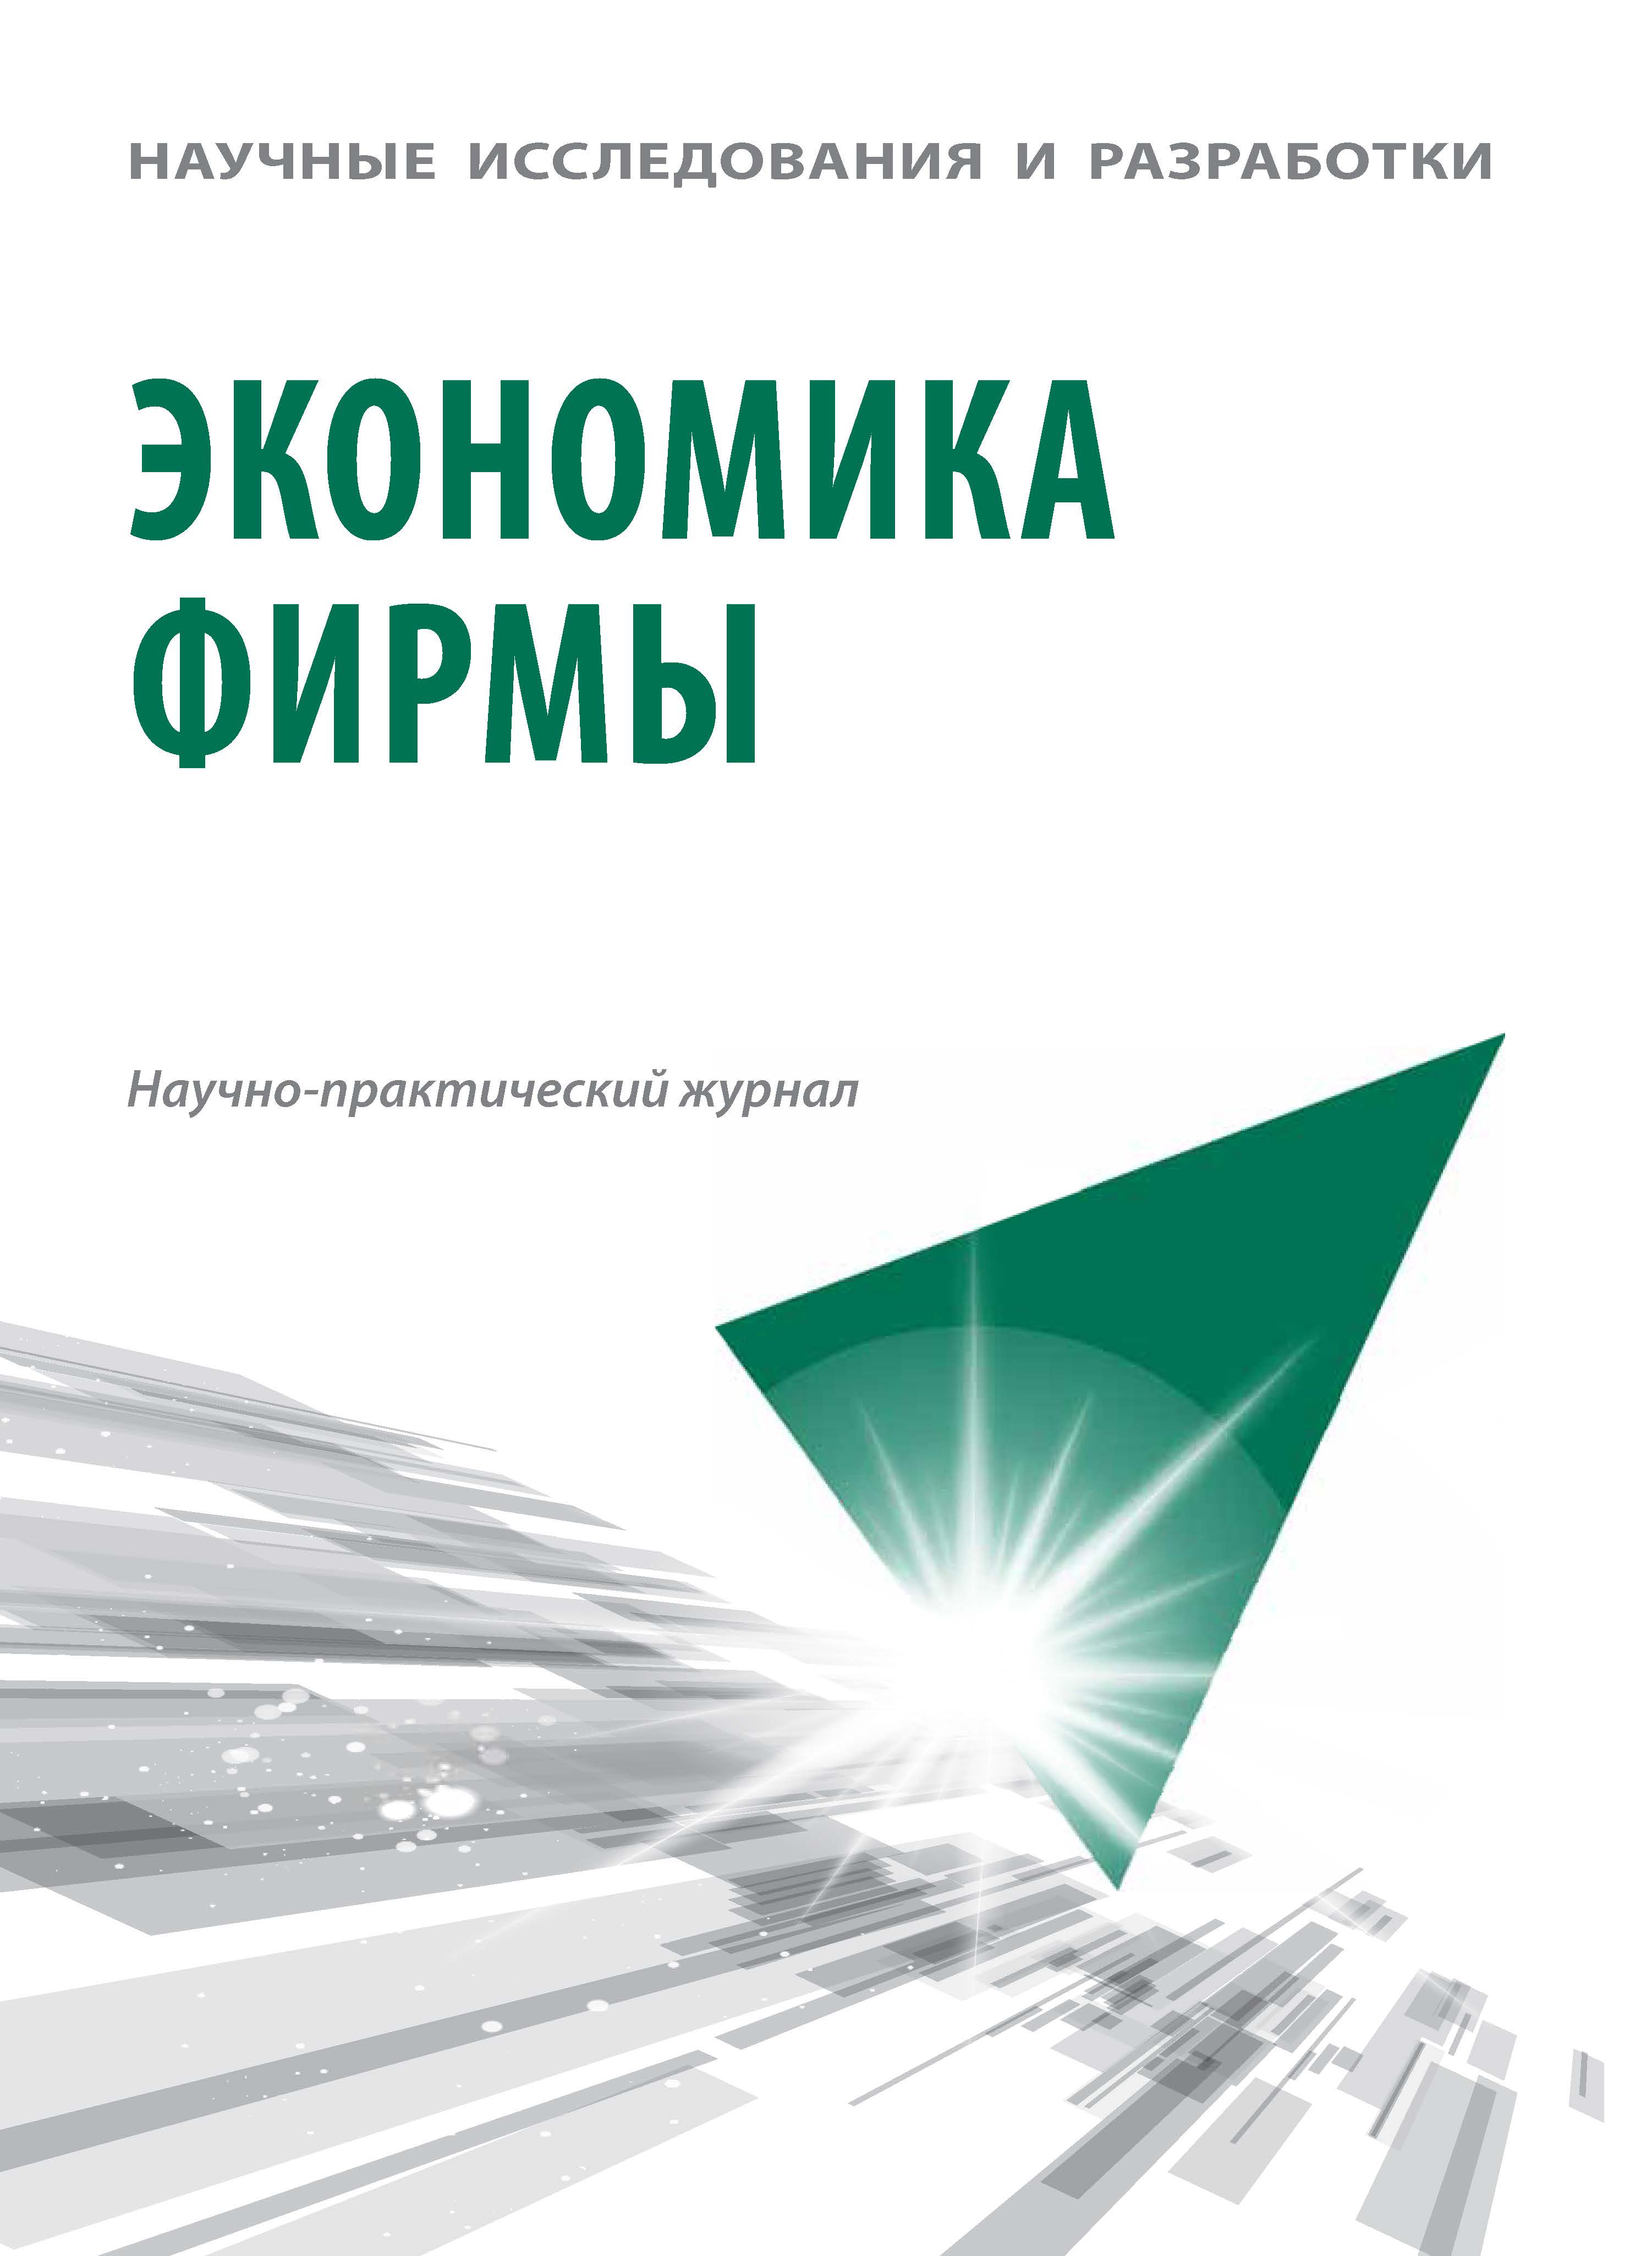                         Assessment of Intellectual Capital in the Innovative Development of the Corporate Sector of the Economy
            